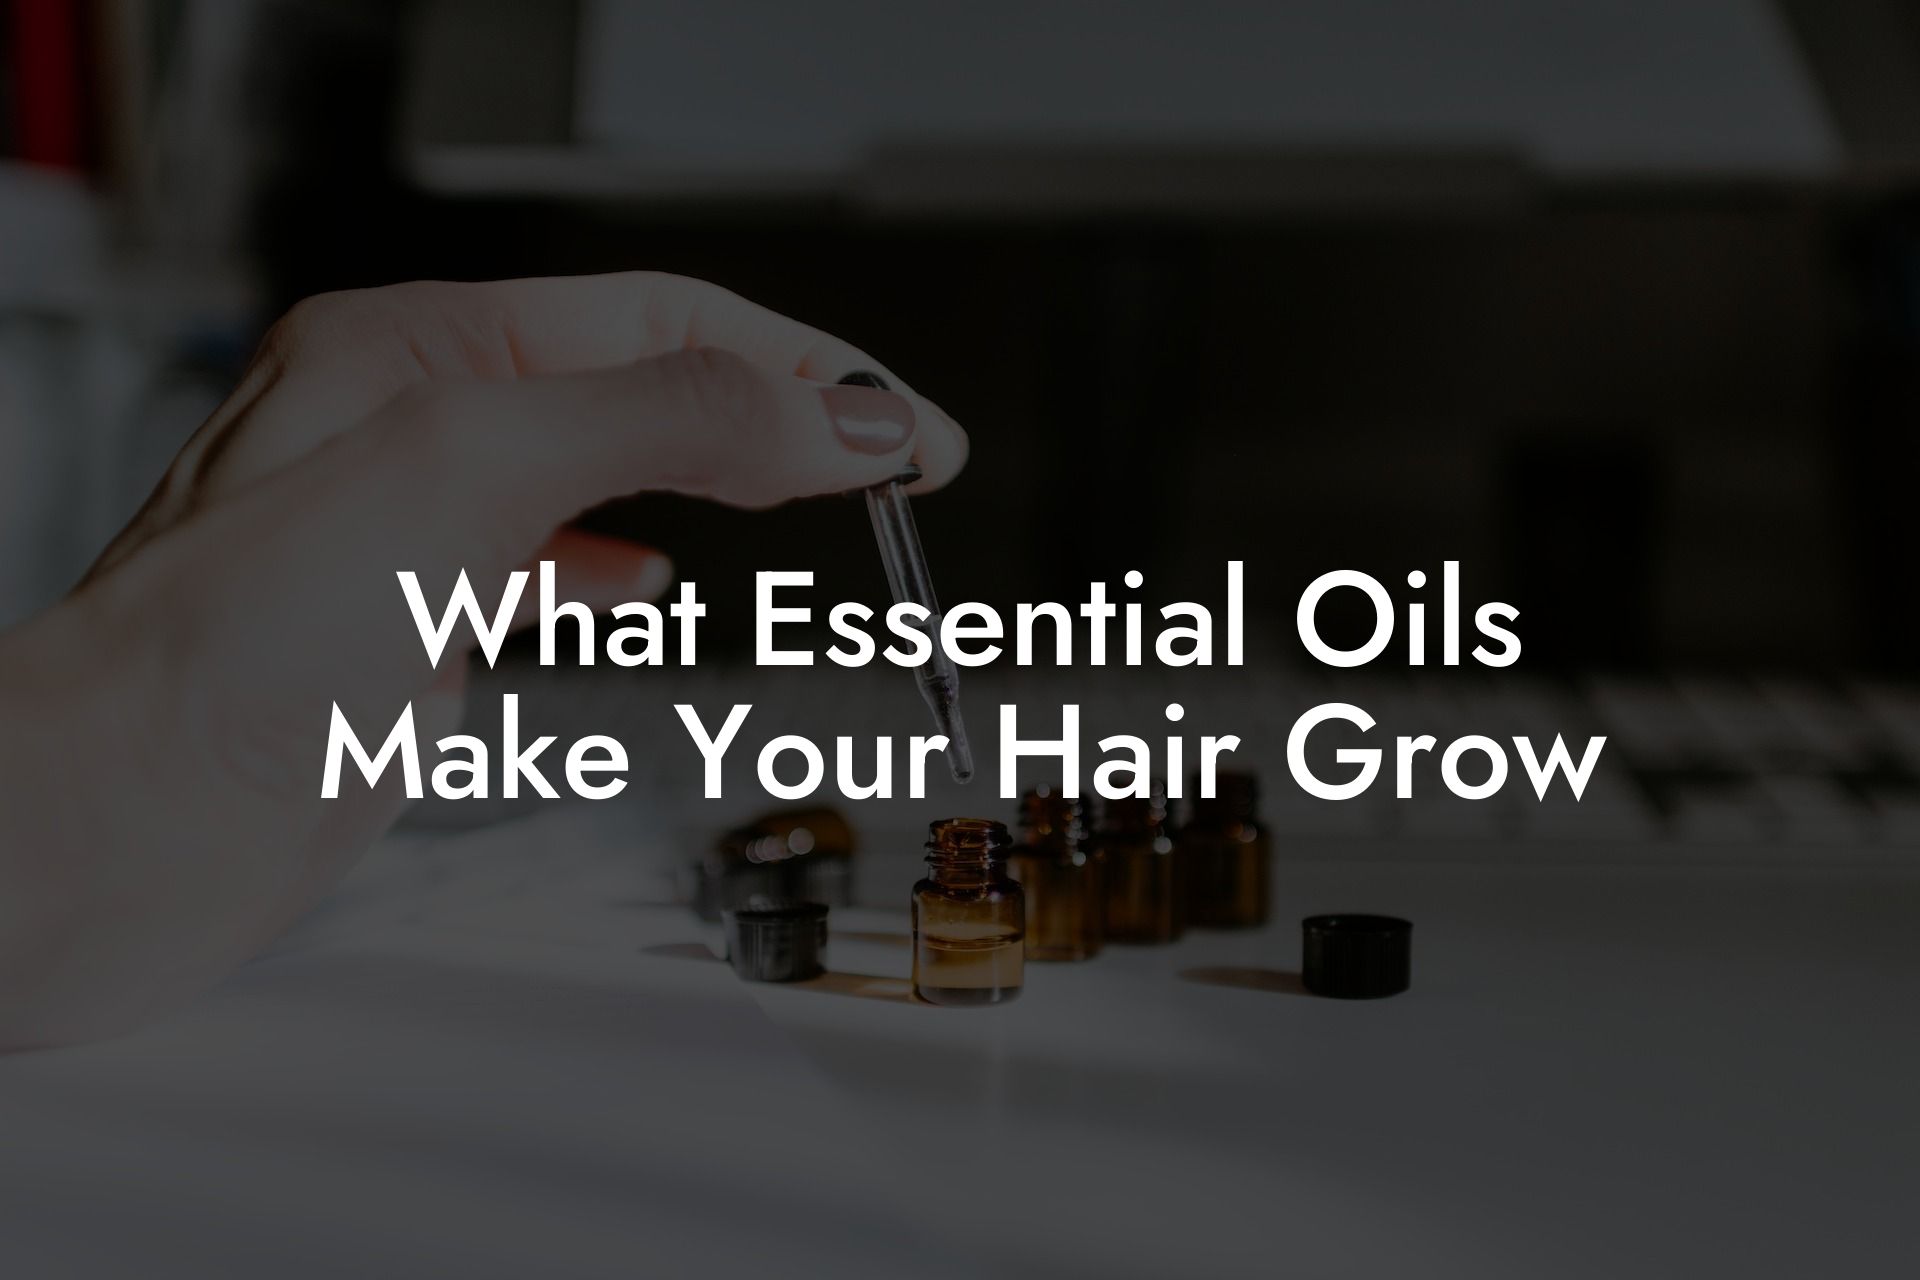 What Essential Oils Make Your Hair Grow